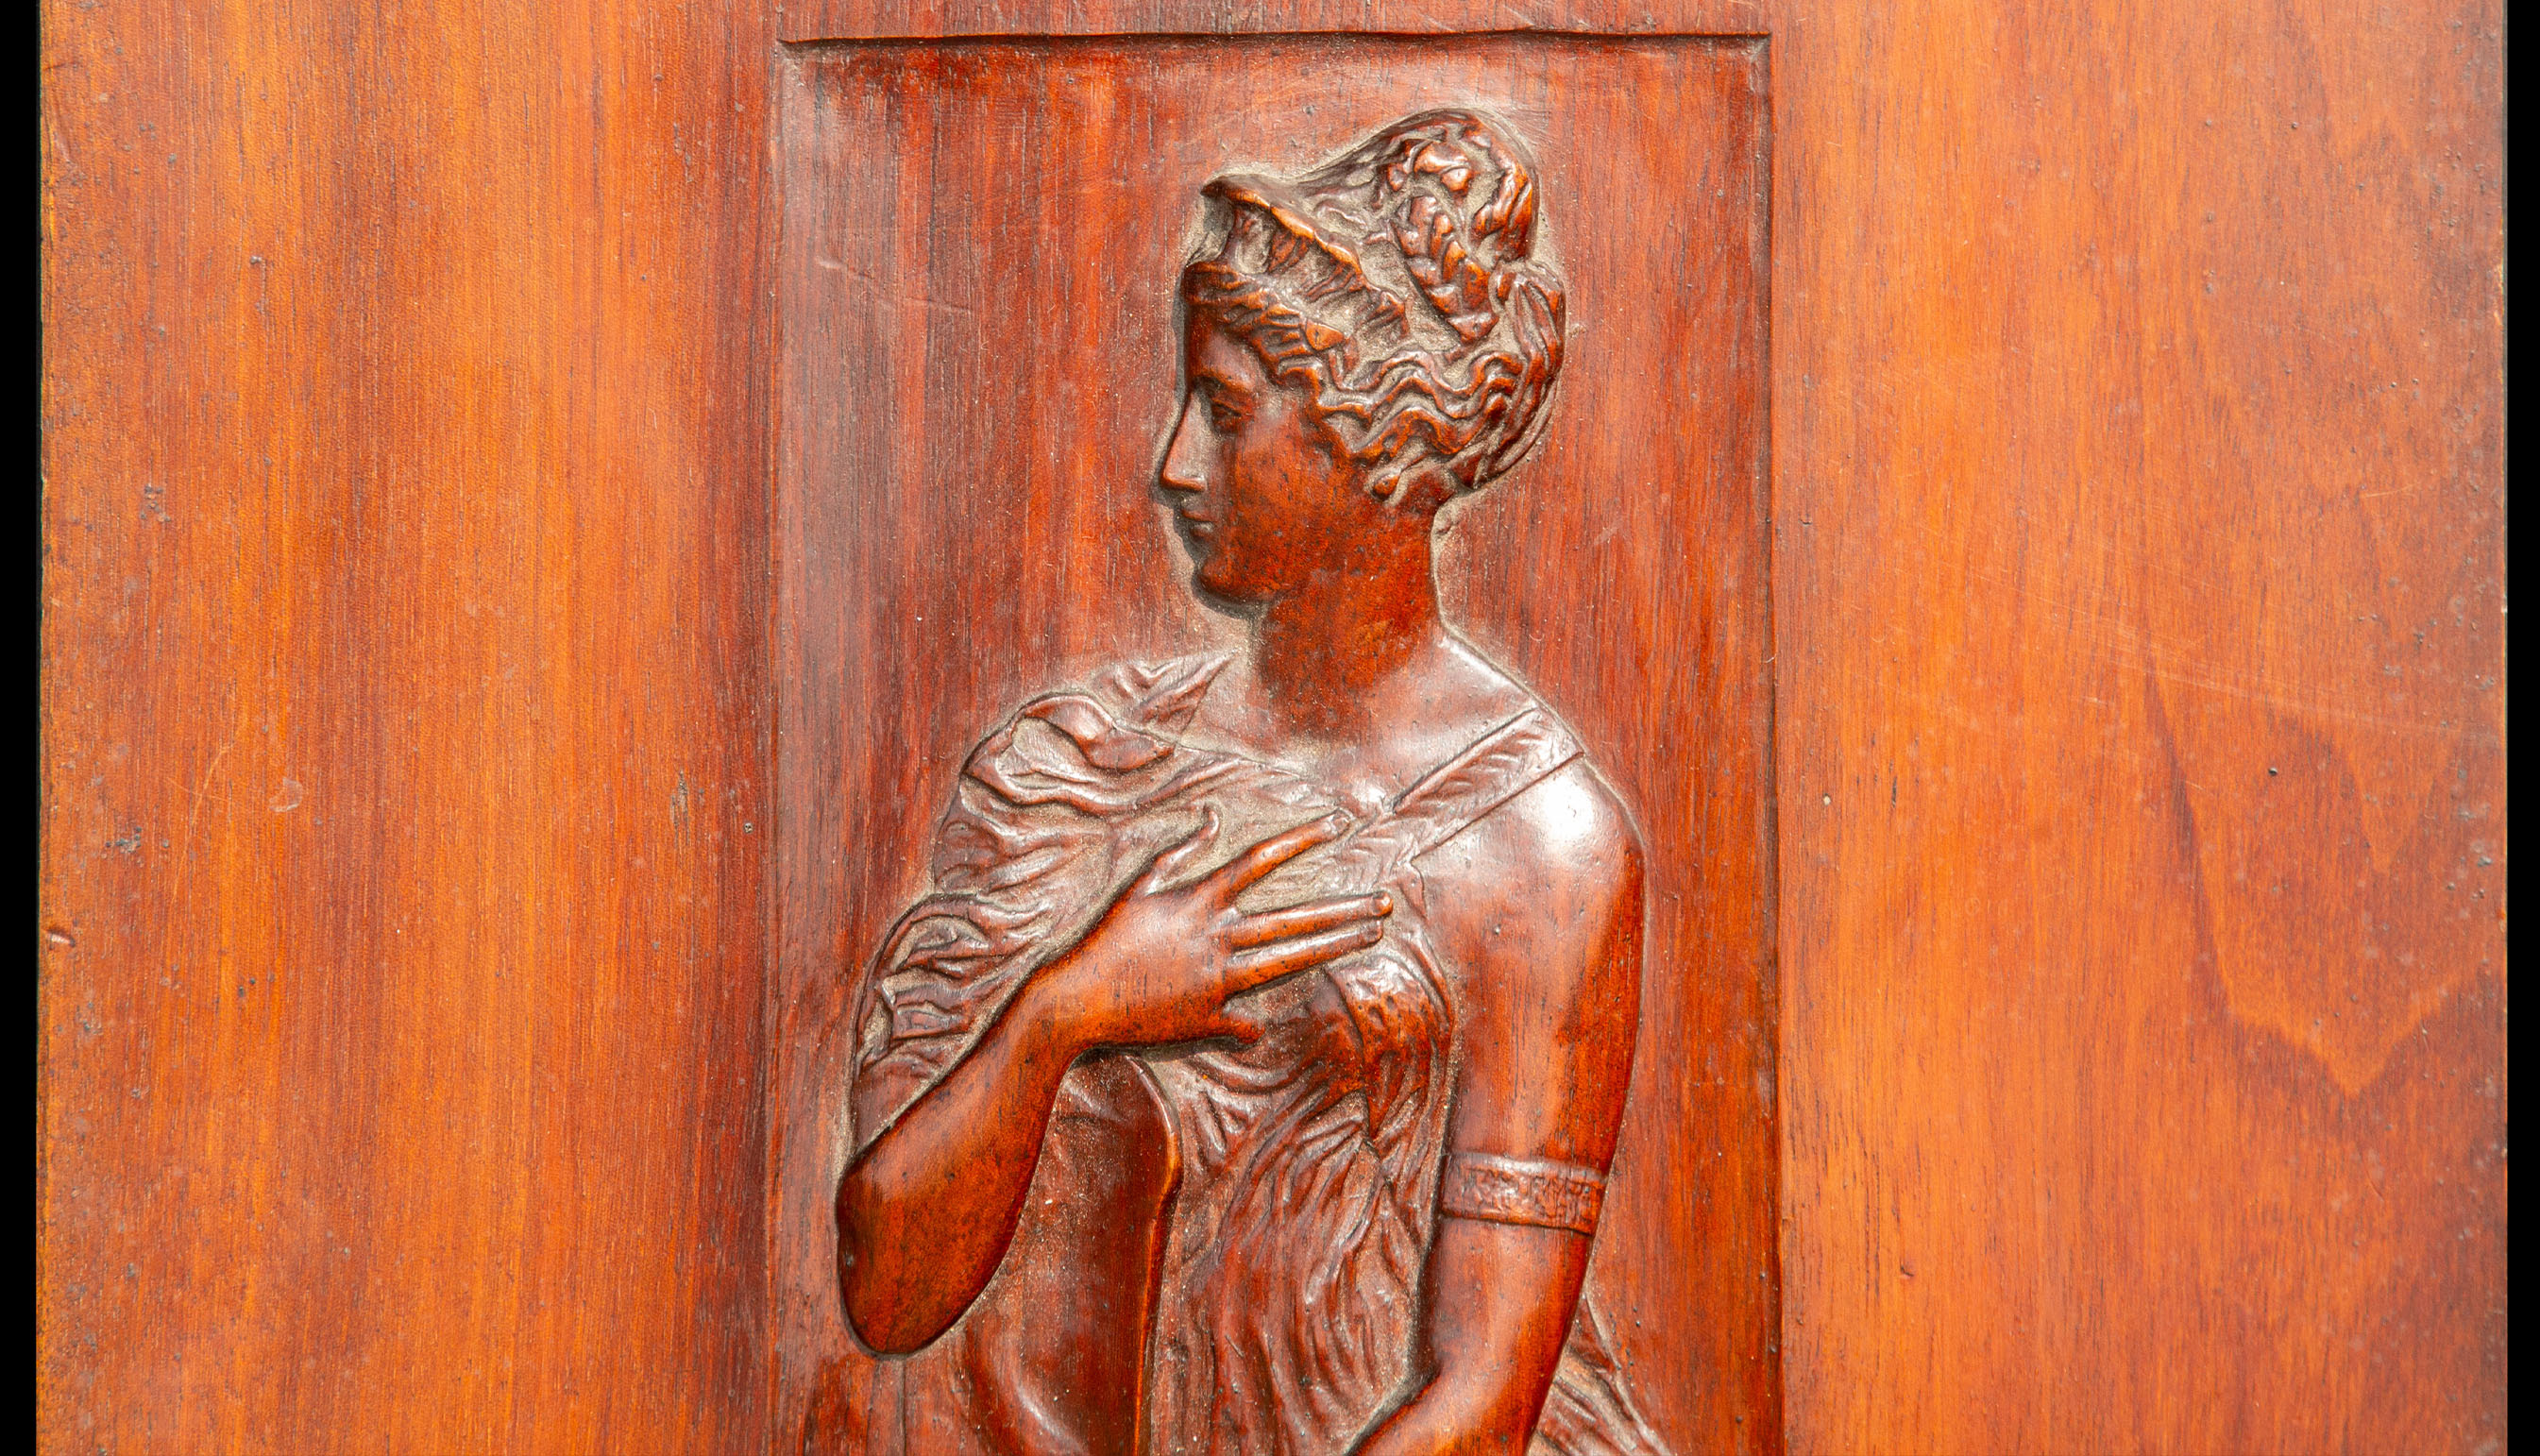 Carved Wood Panel Depicting a Lady